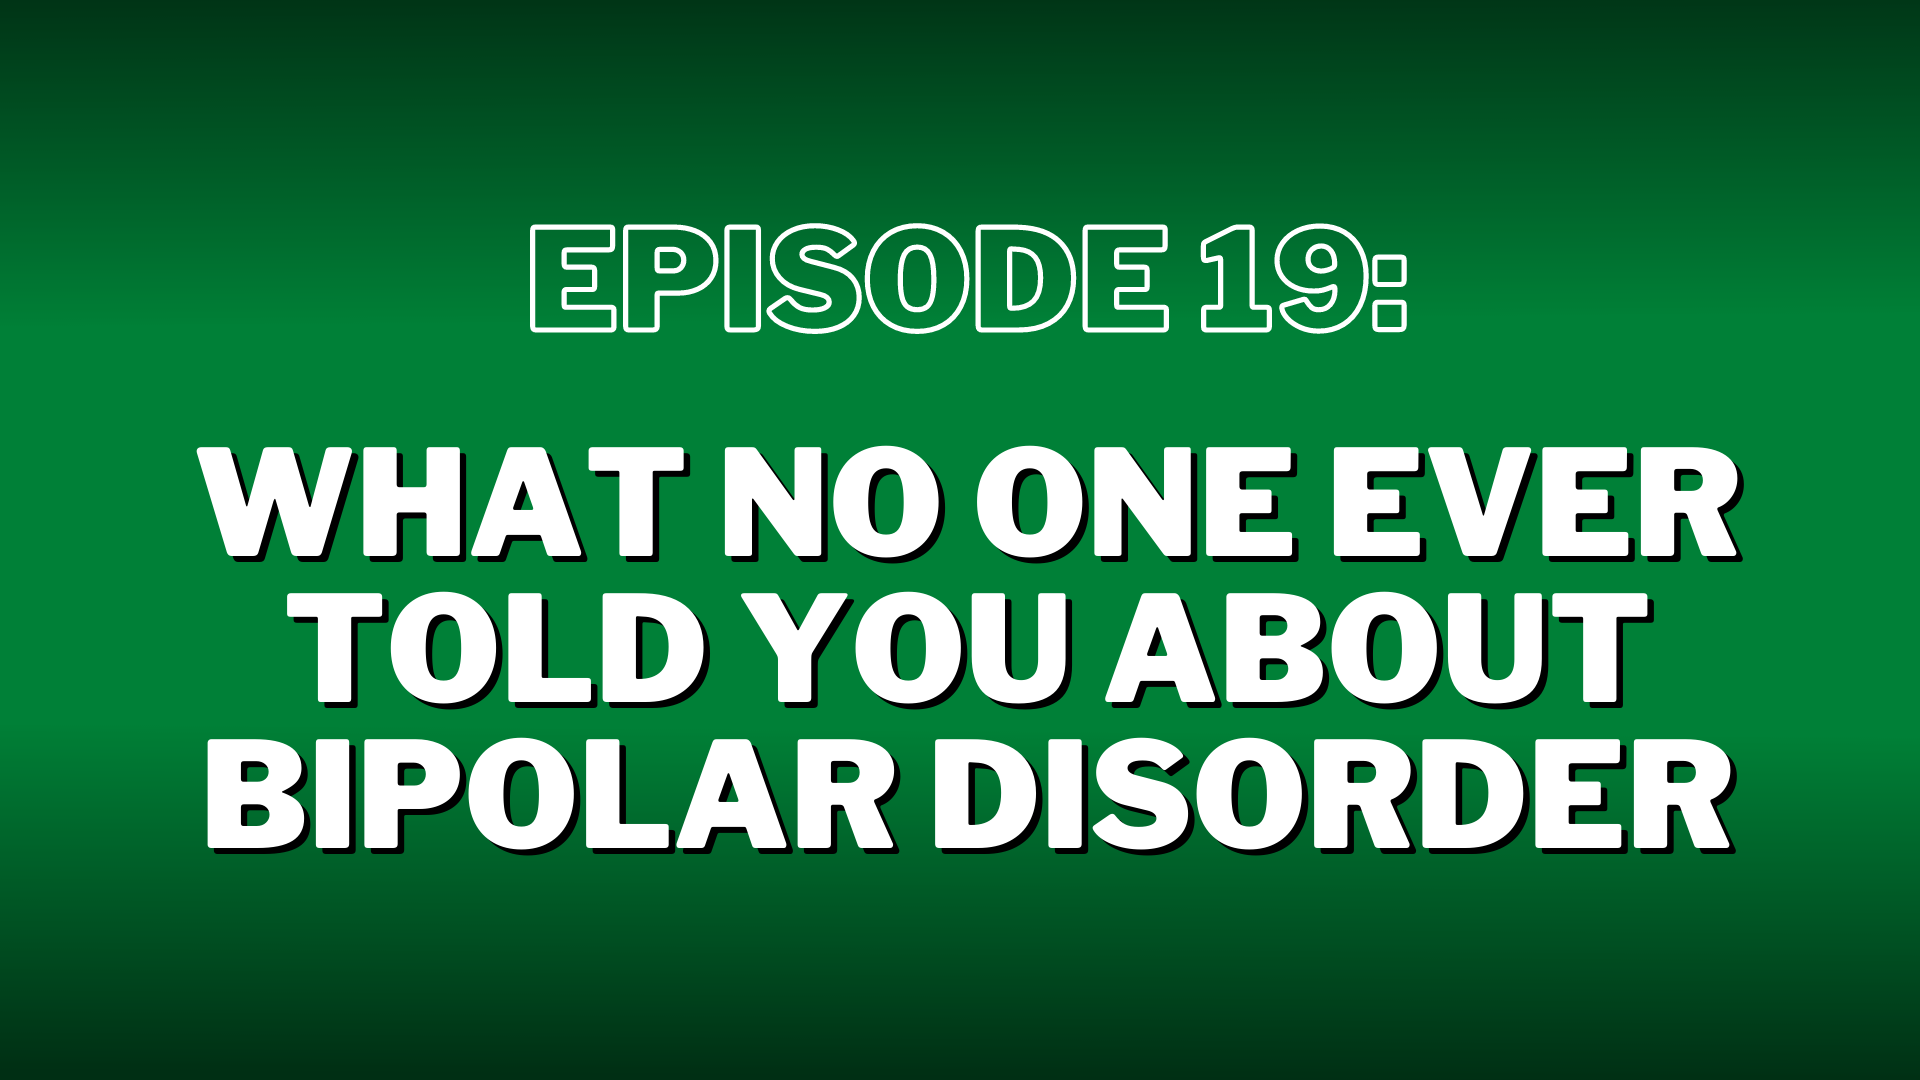 Episode 19: “What No One Ever Told You About Bipolar Disorder” – Show Notes